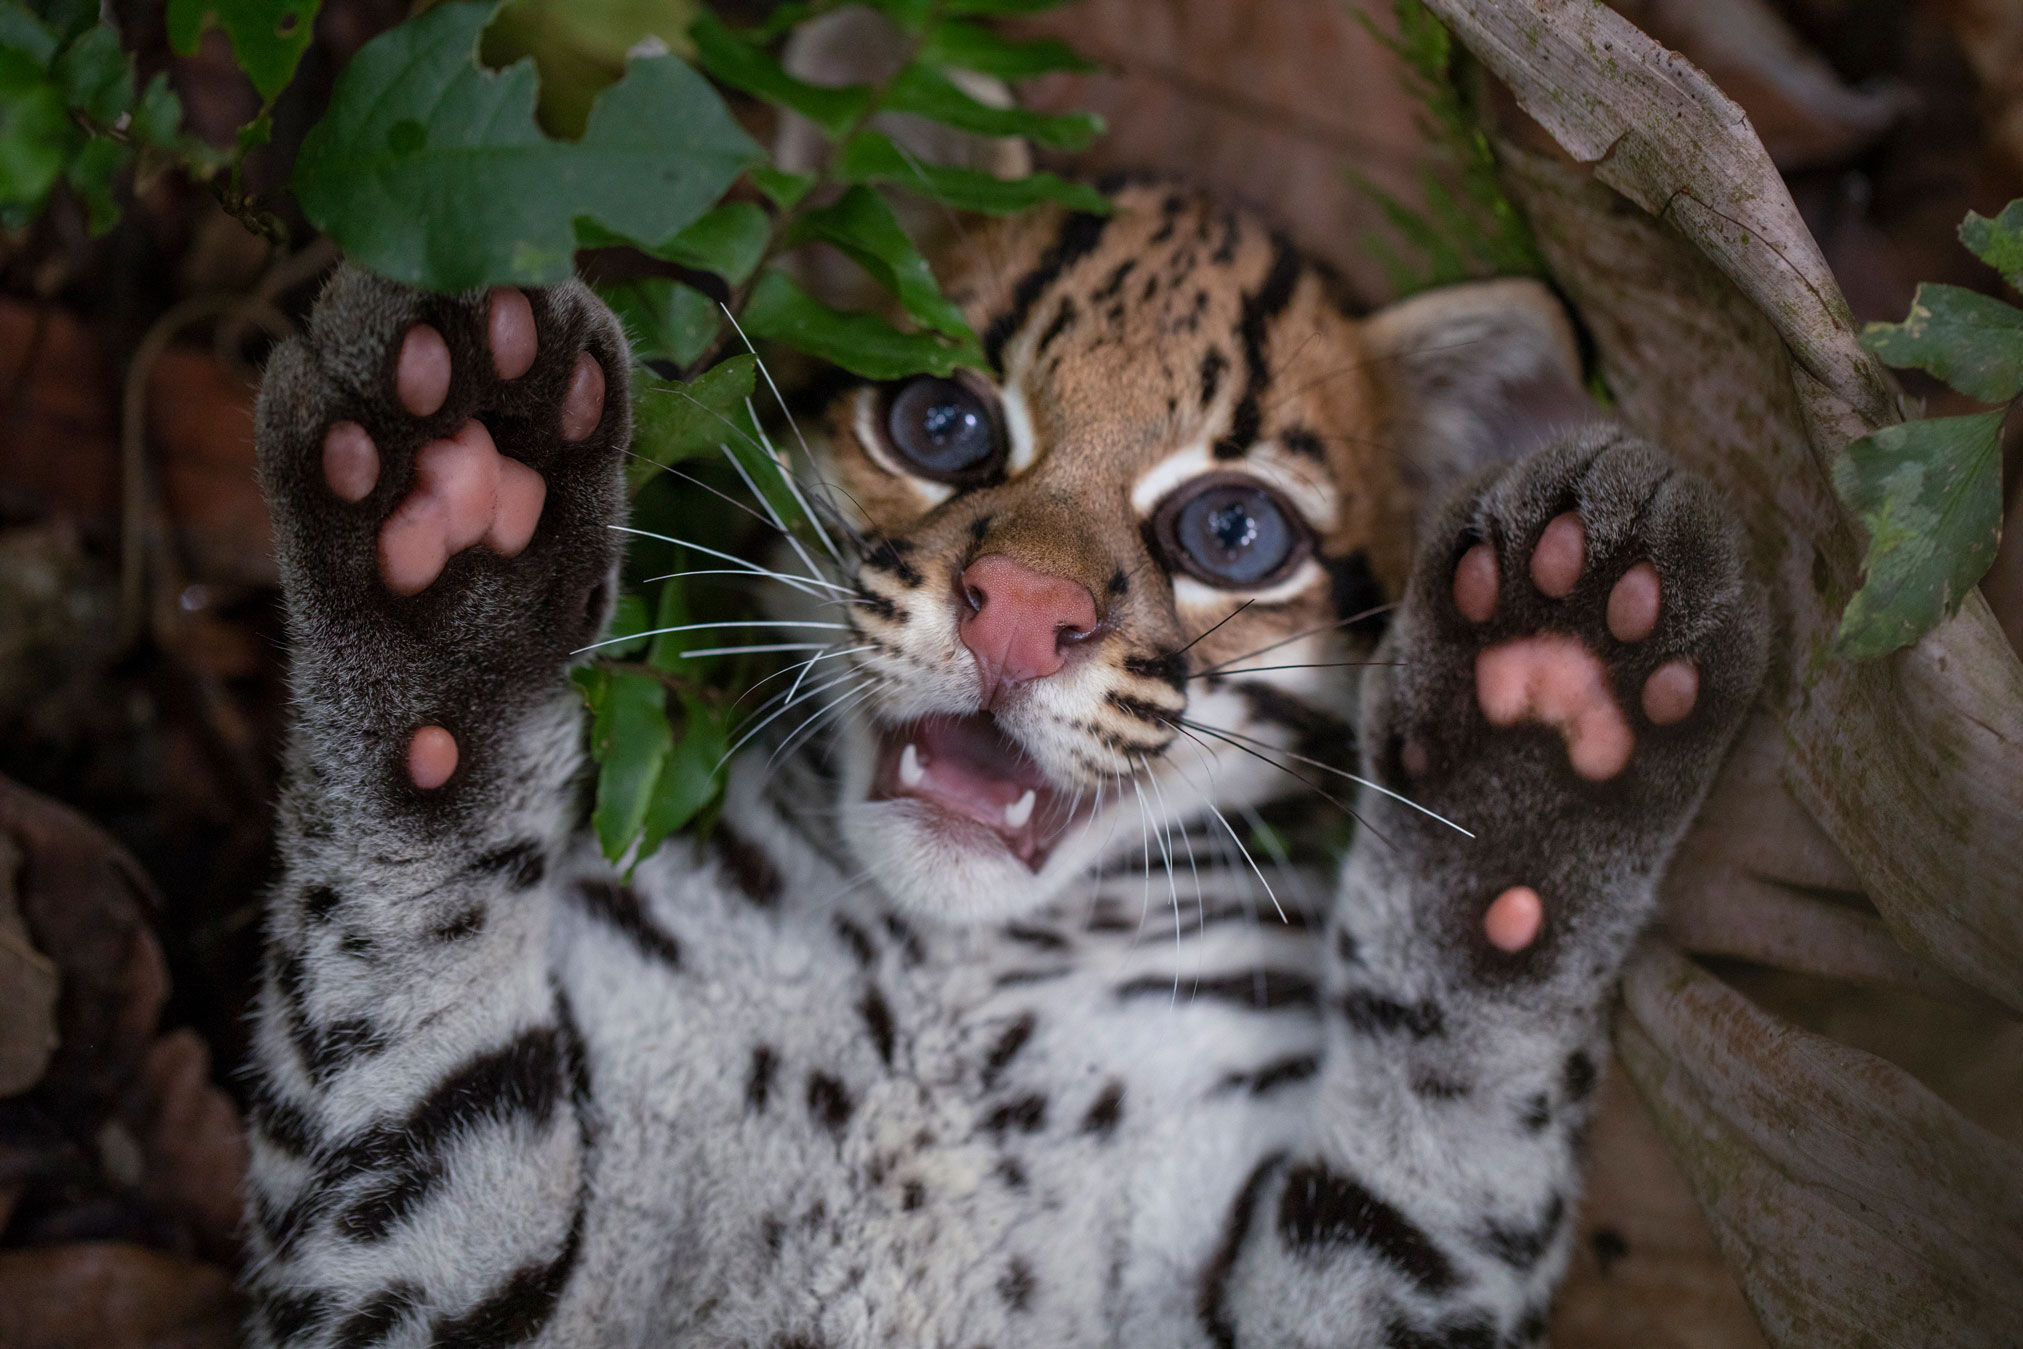 A baby ocelot in ‘Wildcat’. Image: courtesy of Prime Video